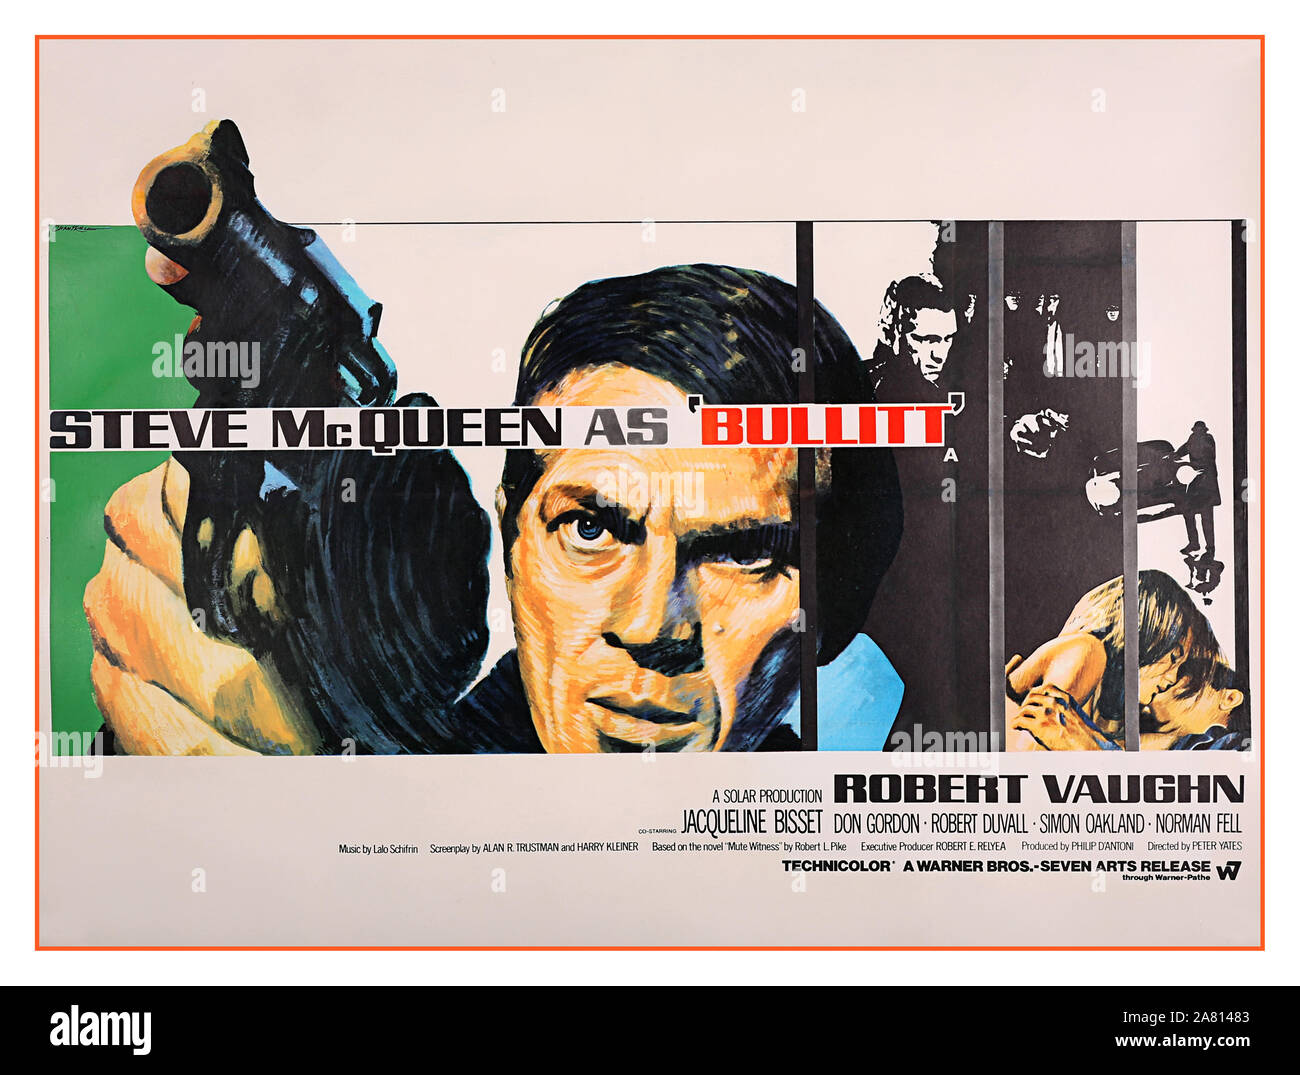 Vintage UK film movie poster for the Steve McQueen movie 'Bullitt' (1968).Bullitt is a 1968 American action thriller film directed by Peter Yates and produced by Philip D'Antoni. The picture stars Steve McQueen, Robert Vaughn, and Jacqueline Bisset. The screenplay by Alan R. Trustman and Harry Kleiner was based on the 1963 novel, Mute Witness, by Robert L. Fish, writing under the pseudonym Robert L. Pike. Lalo Schifrin wrote the original jazz-inspired score, arranged for brass and percussion. Stock Photo